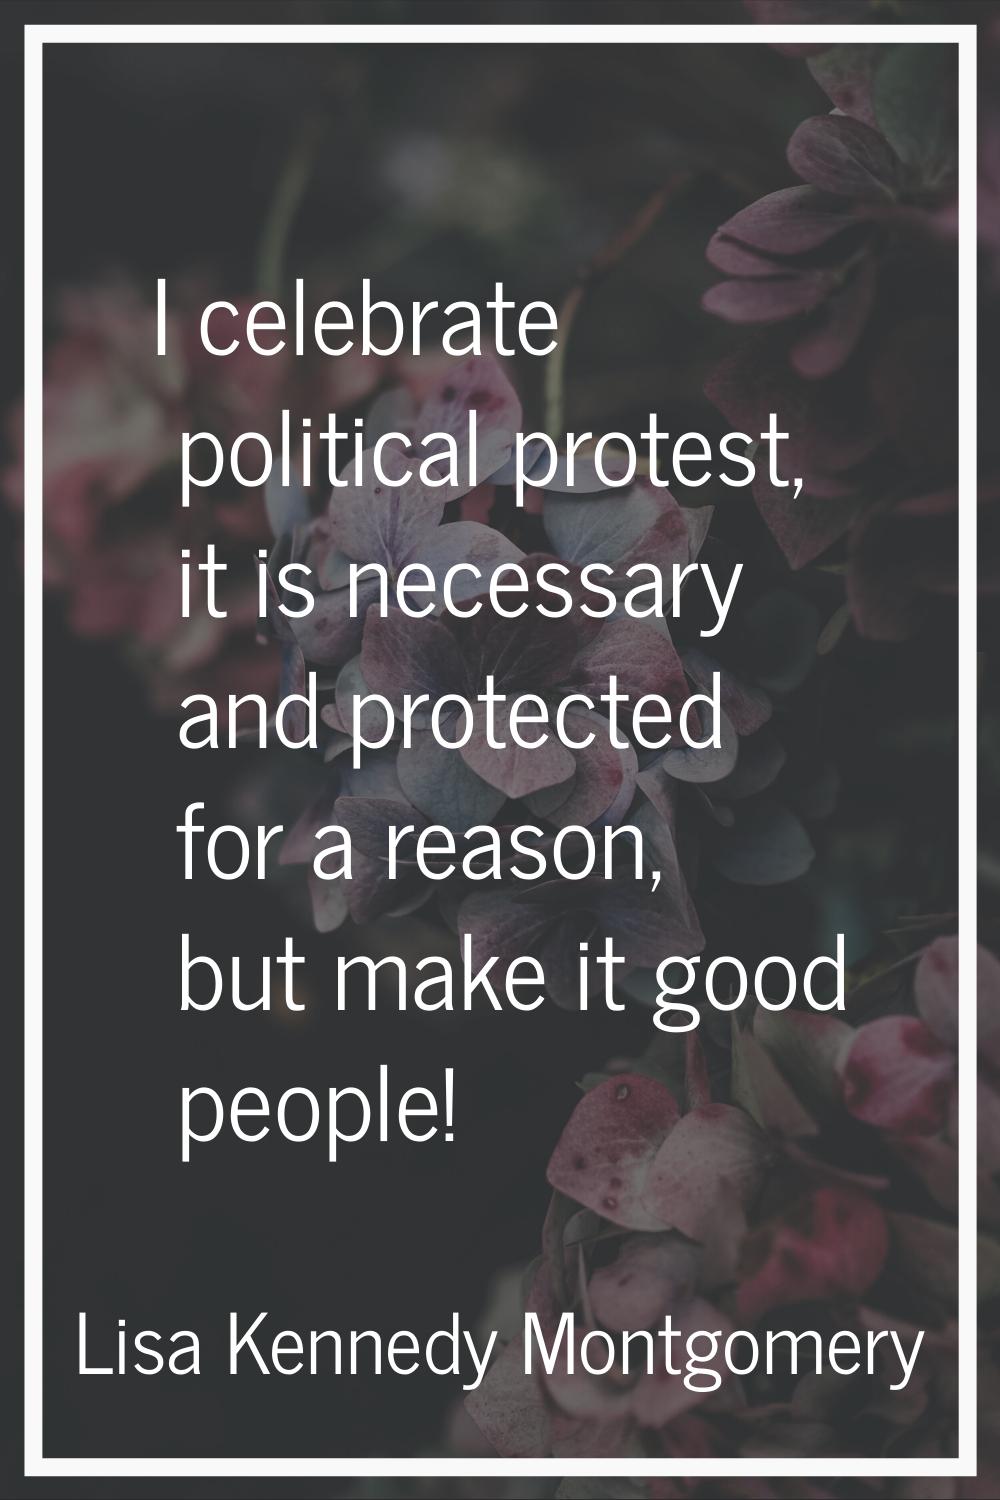 I celebrate political protest, it is necessary and protected for a reason, but make it good people!